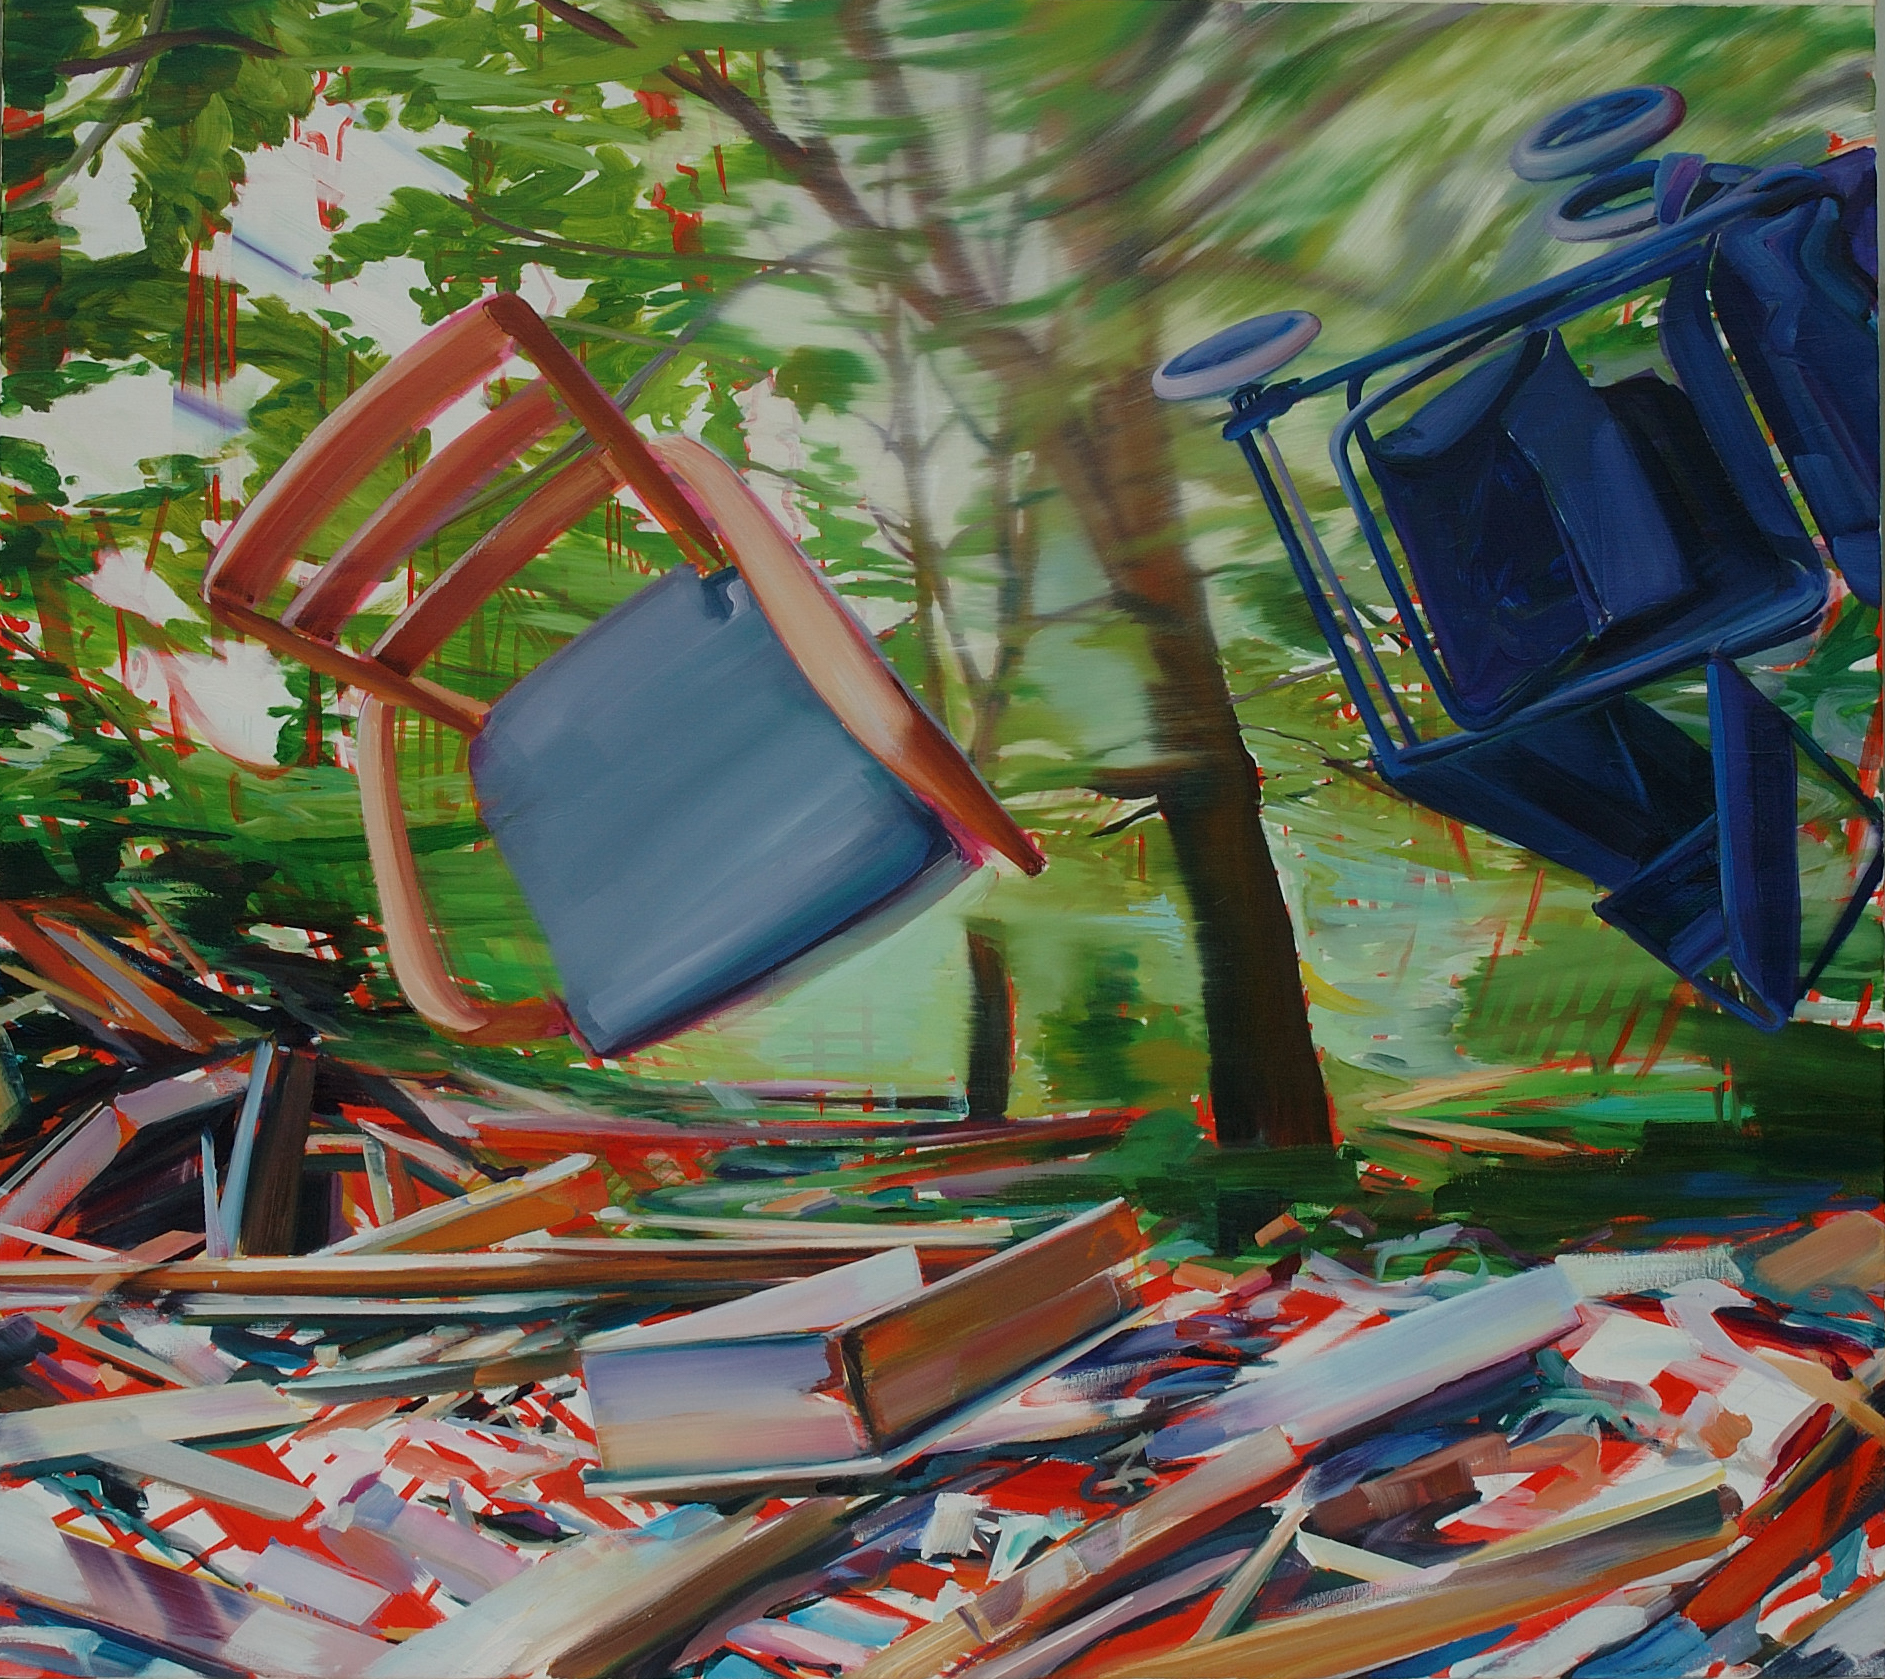   Mobile home , 2007, oil on canvas, 142.5 x 160cm. Maison Marin collection, France 